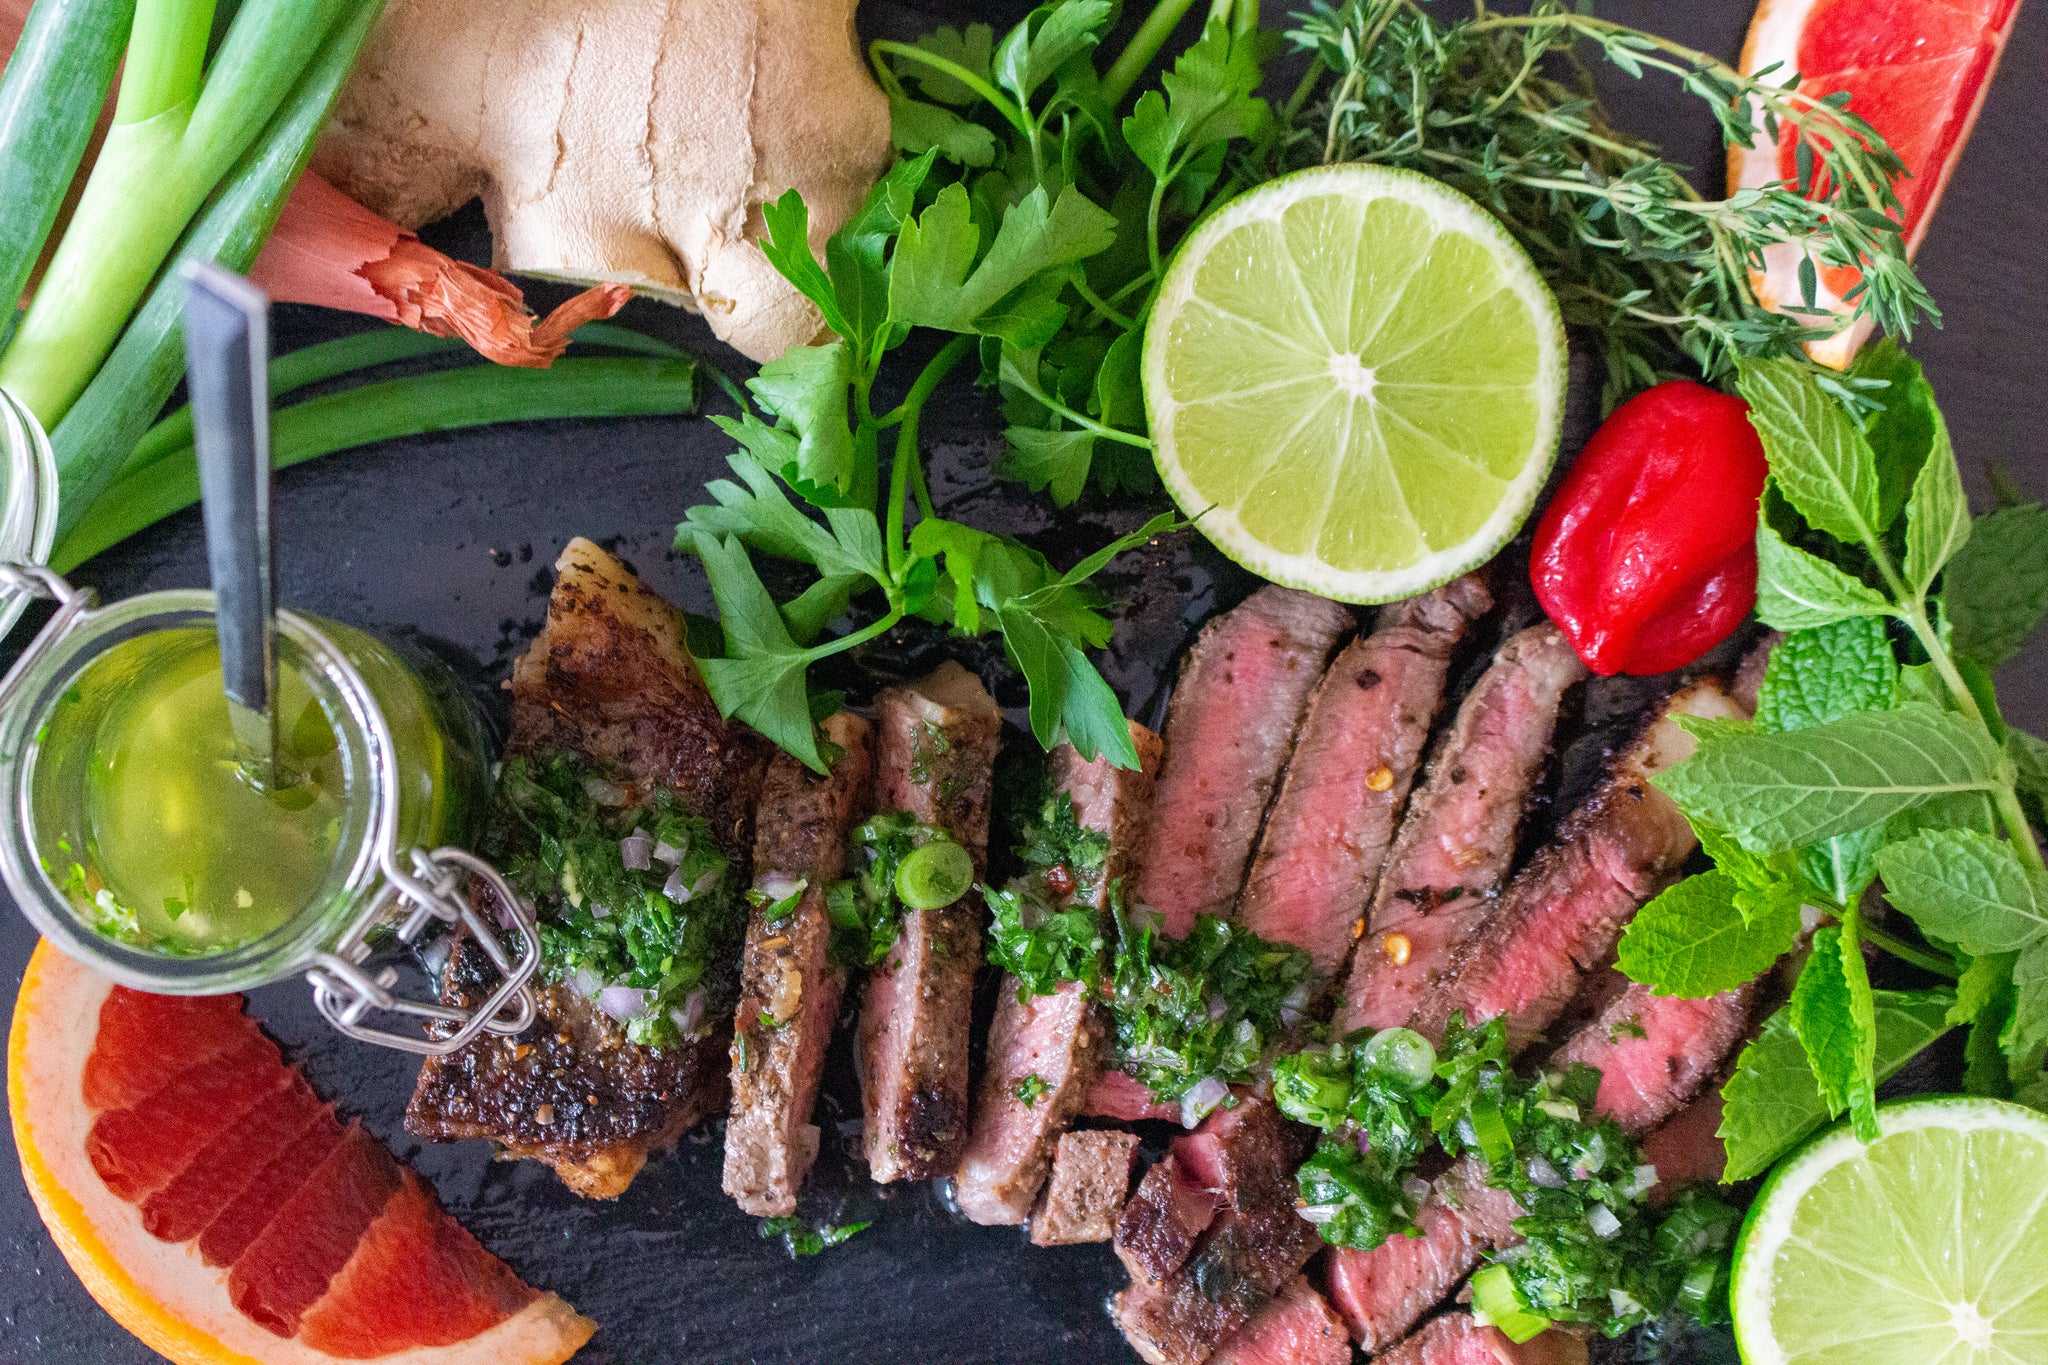 CARIBBEAN STEAK WITH A HERB, GINGER & CITRUS DRESSING RECIPE